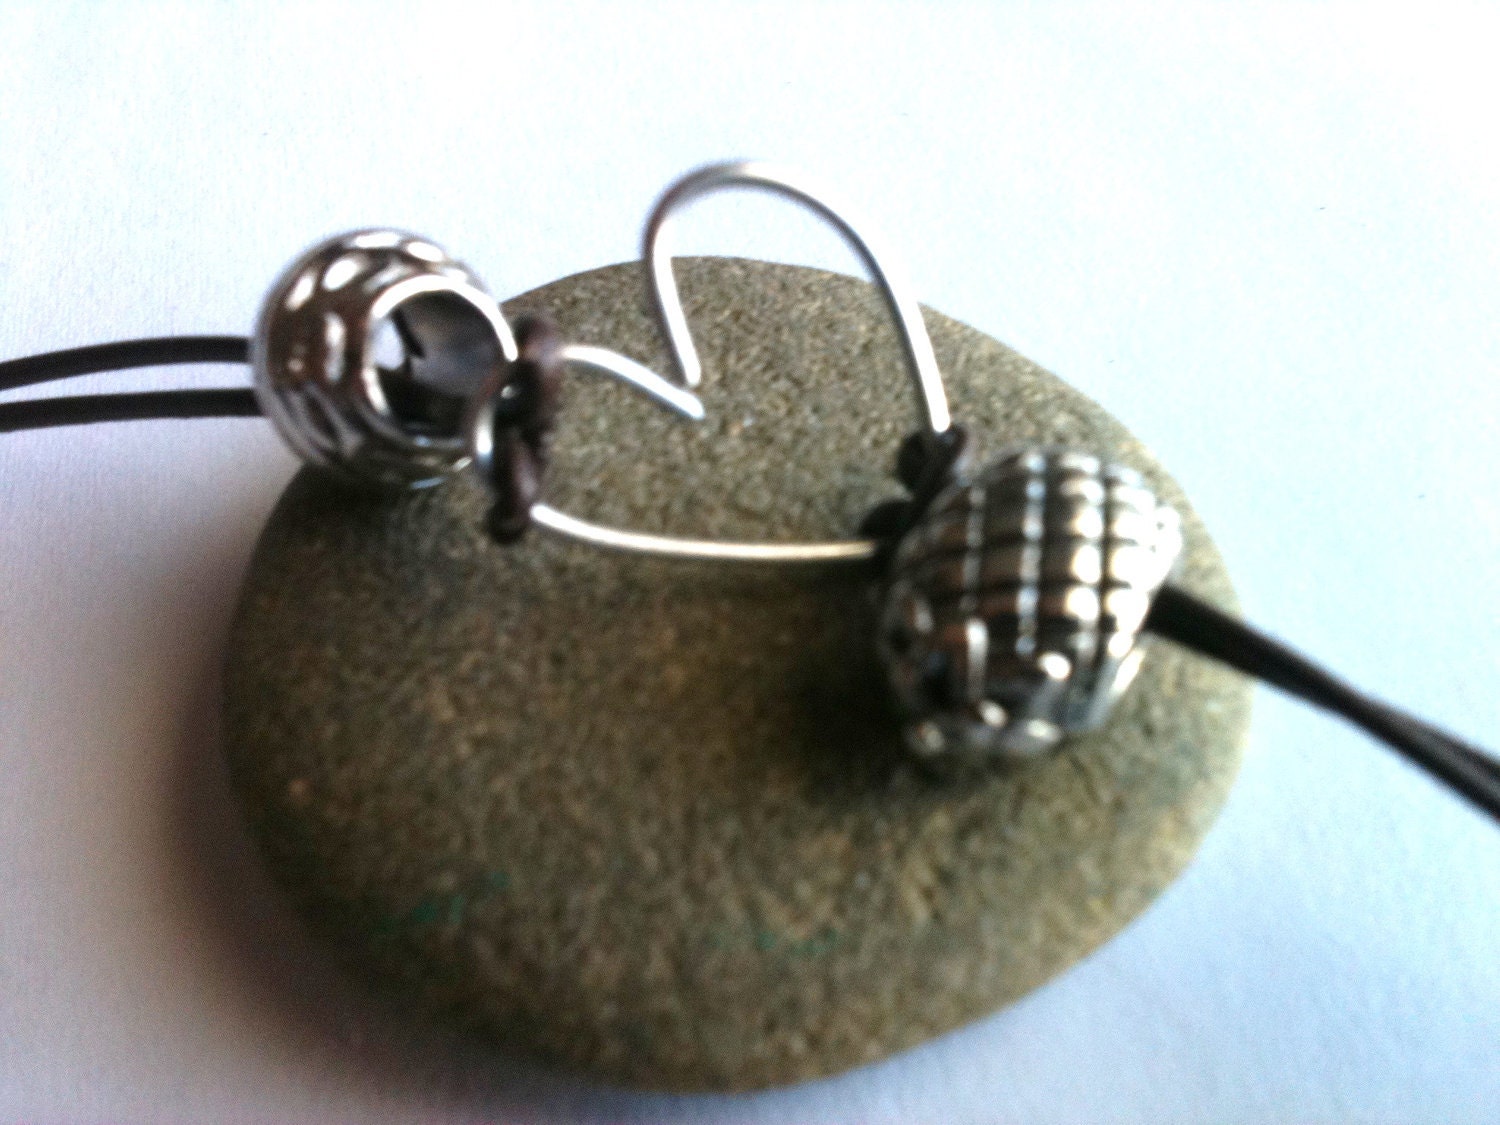 valentine's day, heart jewery, leather jewelry, Pandora style charms, wire jewelry, silver beads, flower beads, leather cord